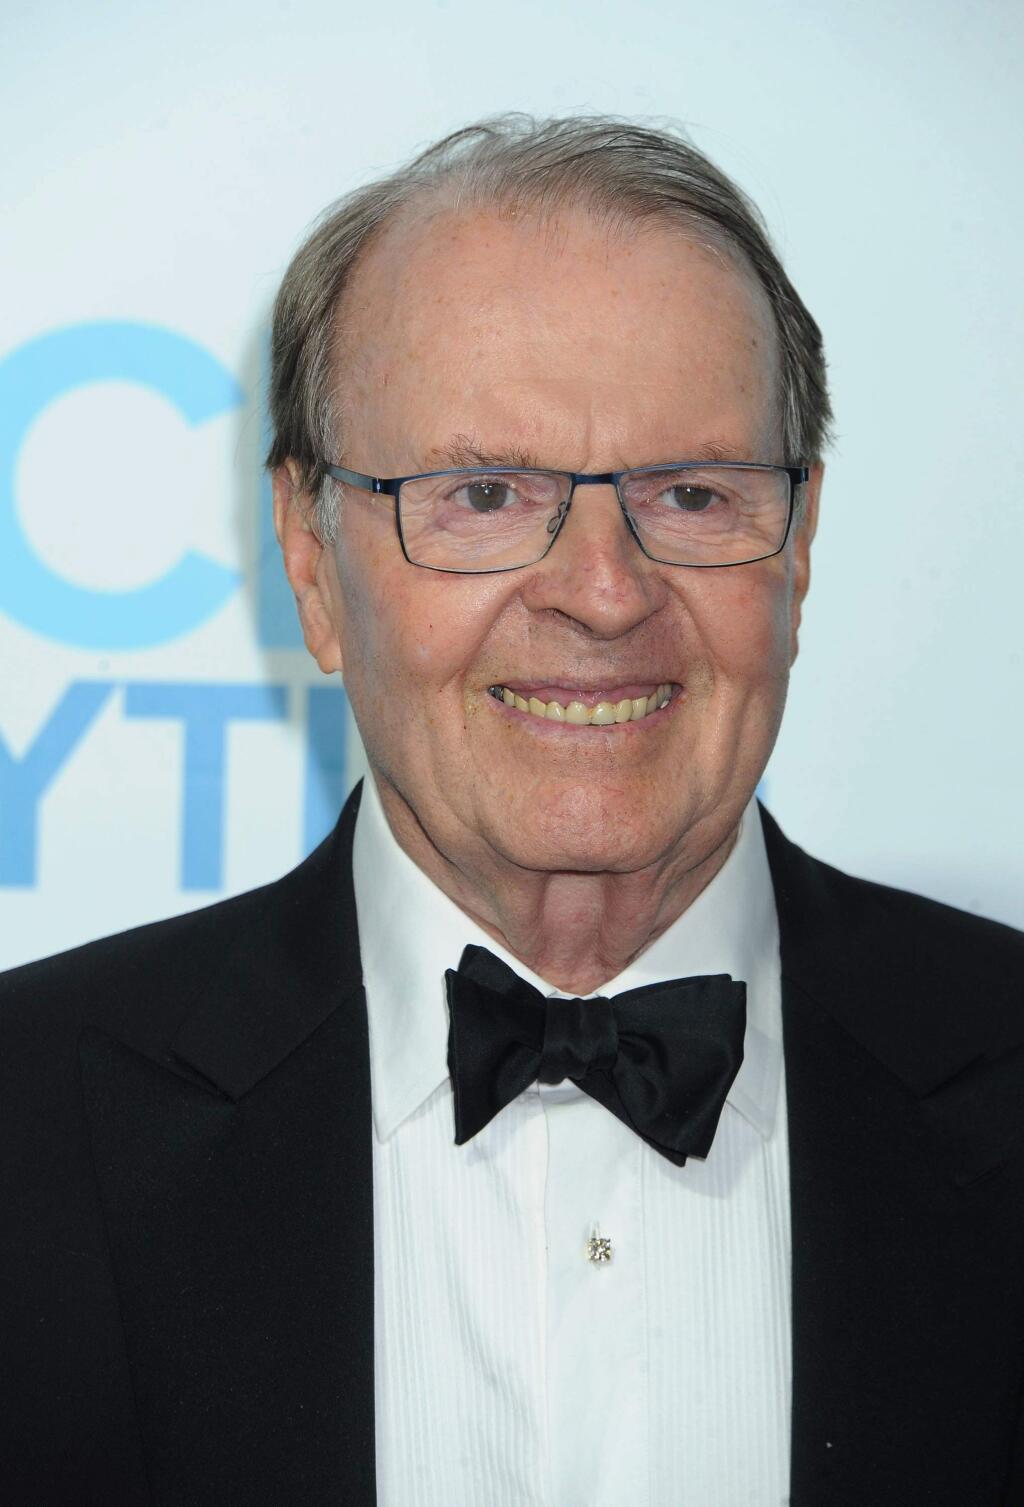 FILE - In this June 22, 2014, file photo, Charles Osgood arrives at the Daytime Emmy Awards Afterparty at The Beverly Hilton in Beverly Hills, Calif. Osgood, who has said 'good morning' to his audience every Sunday, will say 'goodbye' as host of 'CBS News Sunday Morning.' He announced his Sept. 25, 2016, departure on the Sunday, Aug. 28, 2016, edition. (Photo by Katy Winn/Invision/AP, File)